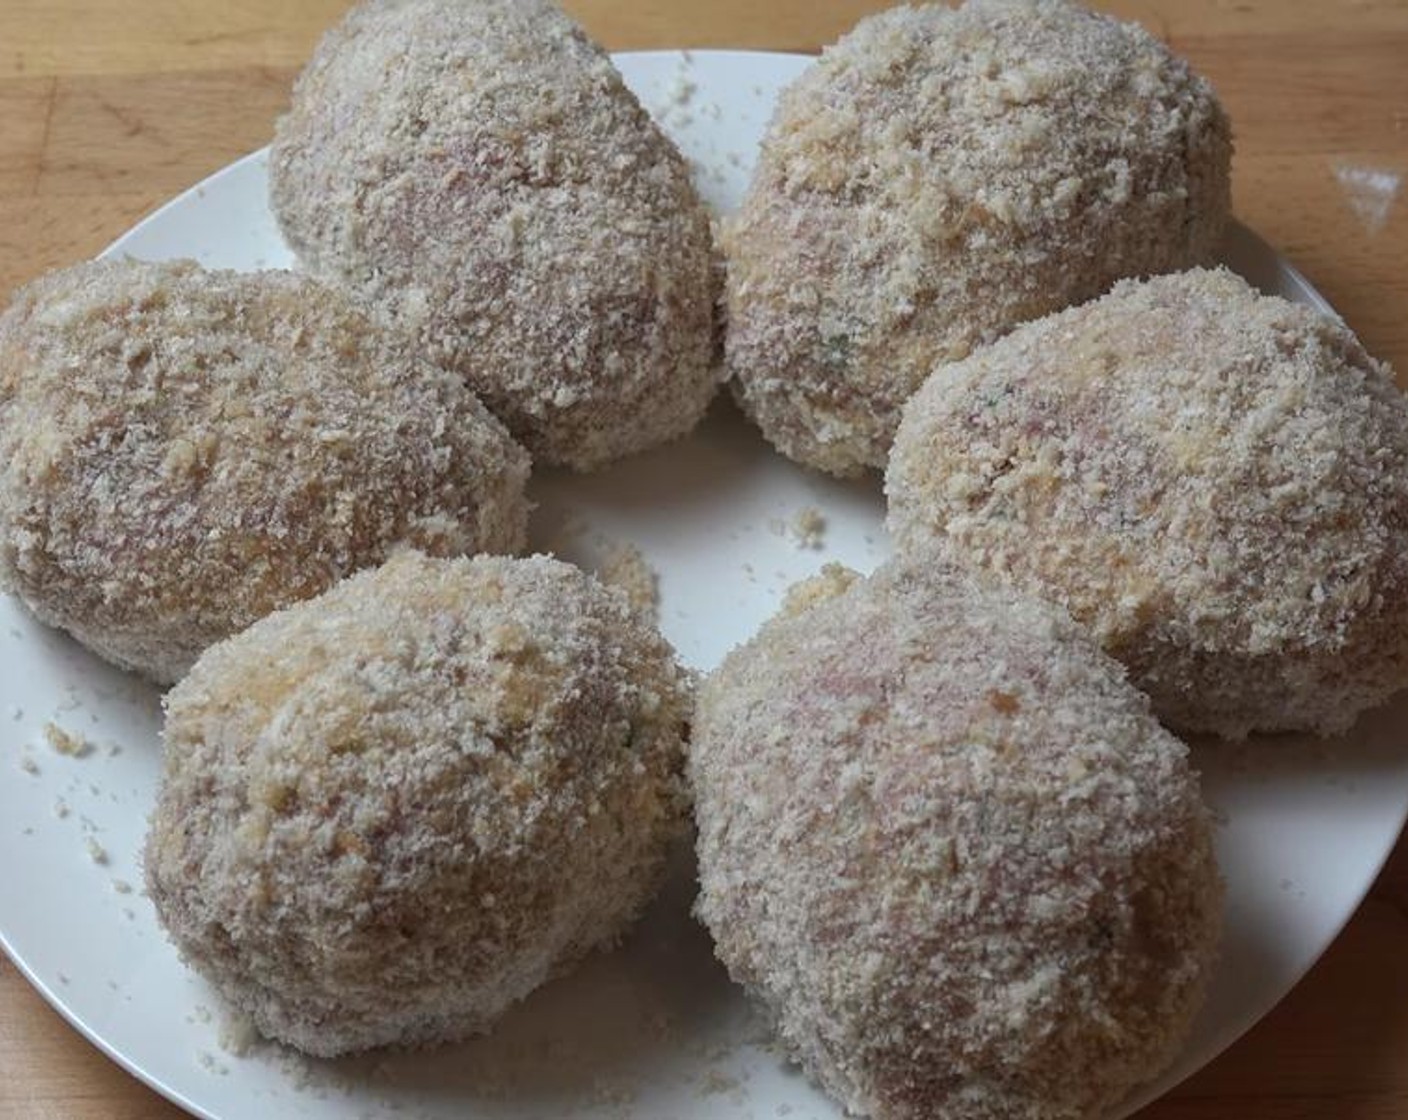 step 5 Season the All-Purpose Flour (1 cup) with Salt (to taste) and Ground Black Pepper (to taste). Beat the 3 remaining Eggs (3). Dredge a scotch egg in seasoned flour and egg. Shake off any access egg, and coat with Breadcrumbs (2 cups). Repeat with remaining scotch eggs.